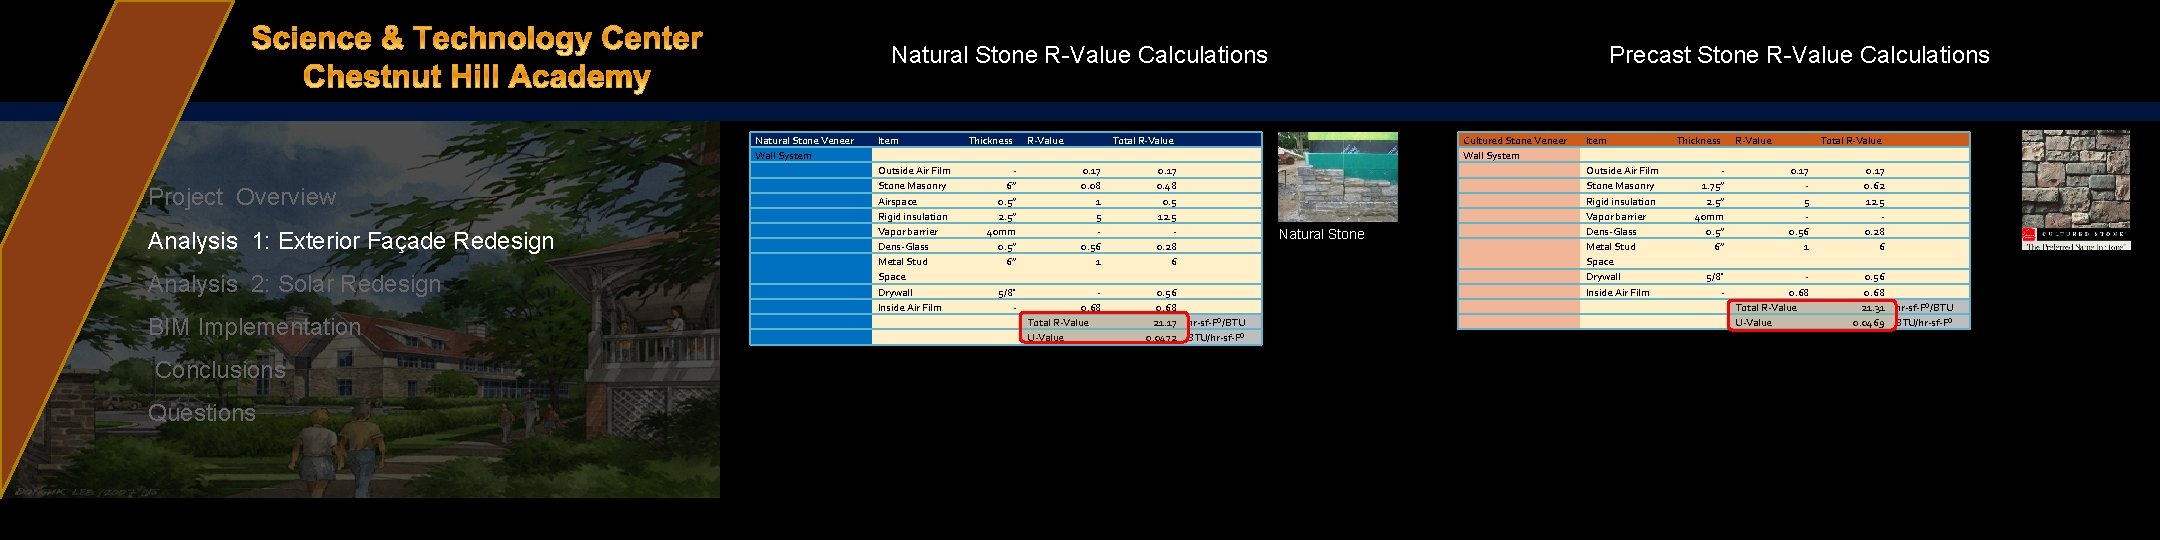 Precast Stone R-Value Calculations Natural Stone Veneer Wall System Project Overview Analysis 1: Exterior